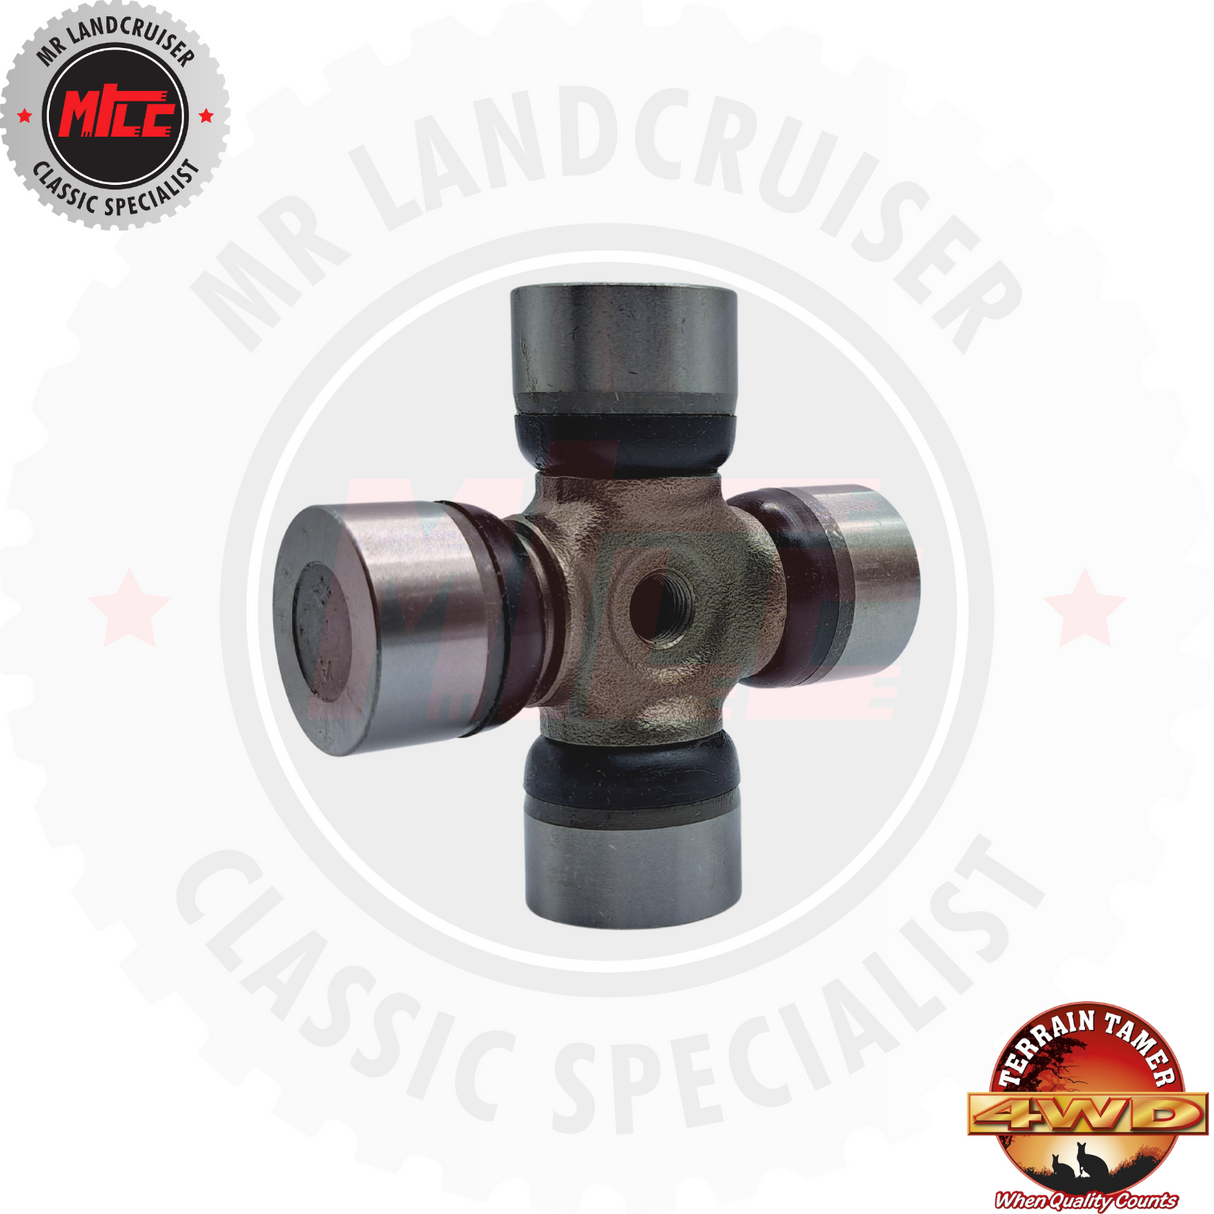 Universal Joint Kit Front & Rear suitable for 40 & 45 series Toyota Landcruiser 